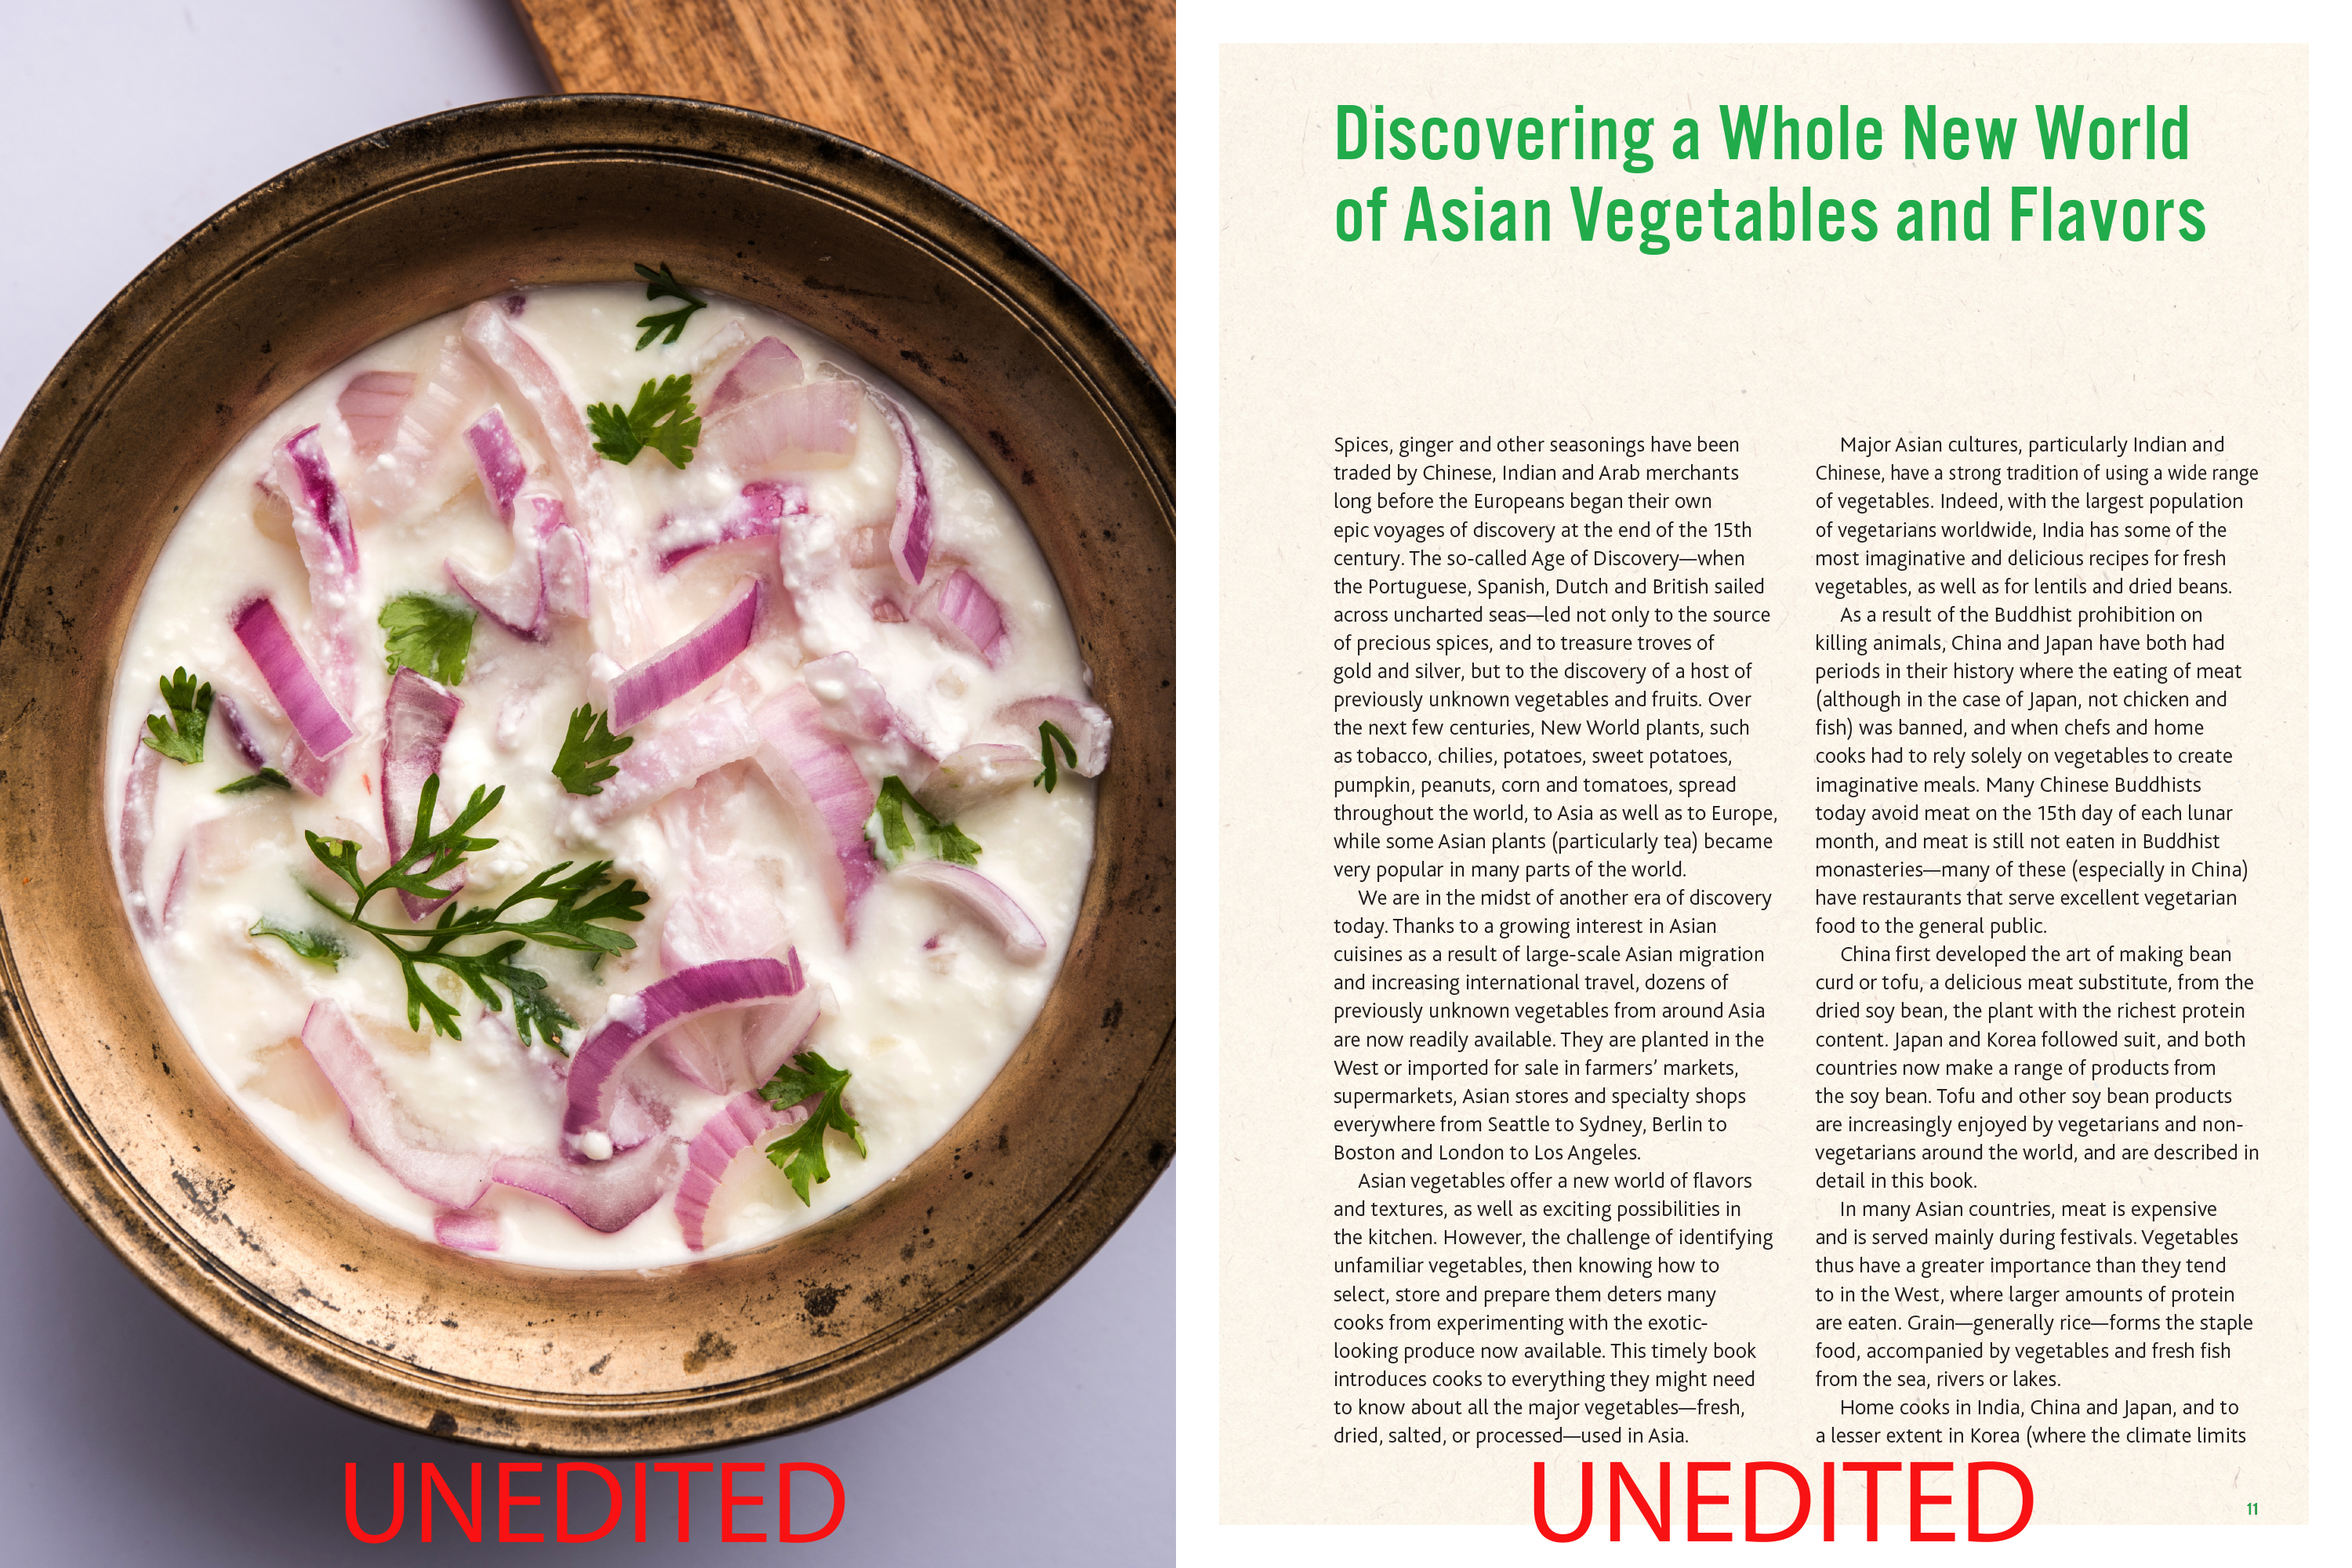 Asian Vegetables: A Cook's Bible